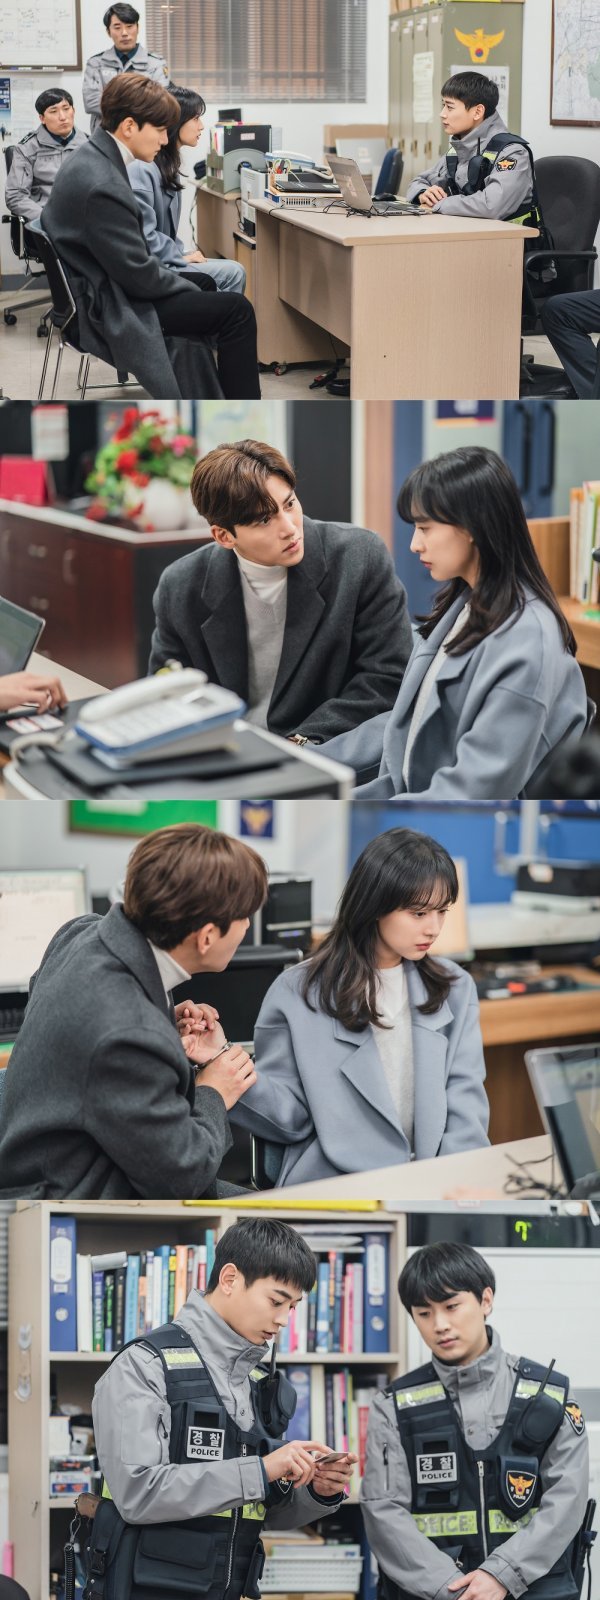 Ji Chang-wook, Kim Ji-won slams The Slap with Victims and a third.In the last 8 times, Park Jae-won, who missed Lee Eun-oh, finally met him again at Cheonggyecheon.Lee Eun-oh desperately fled to avoid Park Jae-won, but eventually he was caught, and Oh Dong-sik (Choi Min-ho), who witnessed it, arrested Lee Eun-oh as a Camera thief.Two people who loved it hotly like fate a year ago, but can Park Jae Won and Lee Eun-oh, who became the Slap with Victims and a third, love again?There is more attention than ever to the romance of the two people.Meanwhile, the photo released on the day showed Park Jae-won and Lee Eun-oh, who are being questioned by Oh Dong-sik.Park Jae-won and Lee Eun-oh, who came to the police box as soon as they met, sat side by side with Handcuffs.Park Jae-wons gaze, which is often asked or curious about Lee Eun-oh, is constantly directed toward Lee Eun-oh, but Lee Eun-oh, who is hiding the identity of Bonka, can not meet Park Jae-won.Oh Dong-sik in the following photo is embarrassed when he sees Lee Eun-ohs resident registration card.It is noteworthy how Park Jae-won and Lee Eun-ohs relationship with the amazing The Slap will change in the future, and how Park Jae-won, who still knows Lee Eun-oh as Yoon Sun-ah, will react after he finds out the real image of Lee Eun-oh.From the ninth episode, which will be released on the 19th, a new story of Park Jae-won and Lee Eun-oh will be unfolded, which will start again in a different relationship.The emotional changes and unpredictable developments of the two will increase the flow, he said. We hope that the acting Synergy of Romance Artisan Ji Chang-wook and Kim Ji-won and Choi Min-ho will play a role of licorice in between.Meanwhile, the 9th episode of Terrace Houses Love Law will be released on Kakao TV at 5 pm on the 19th.